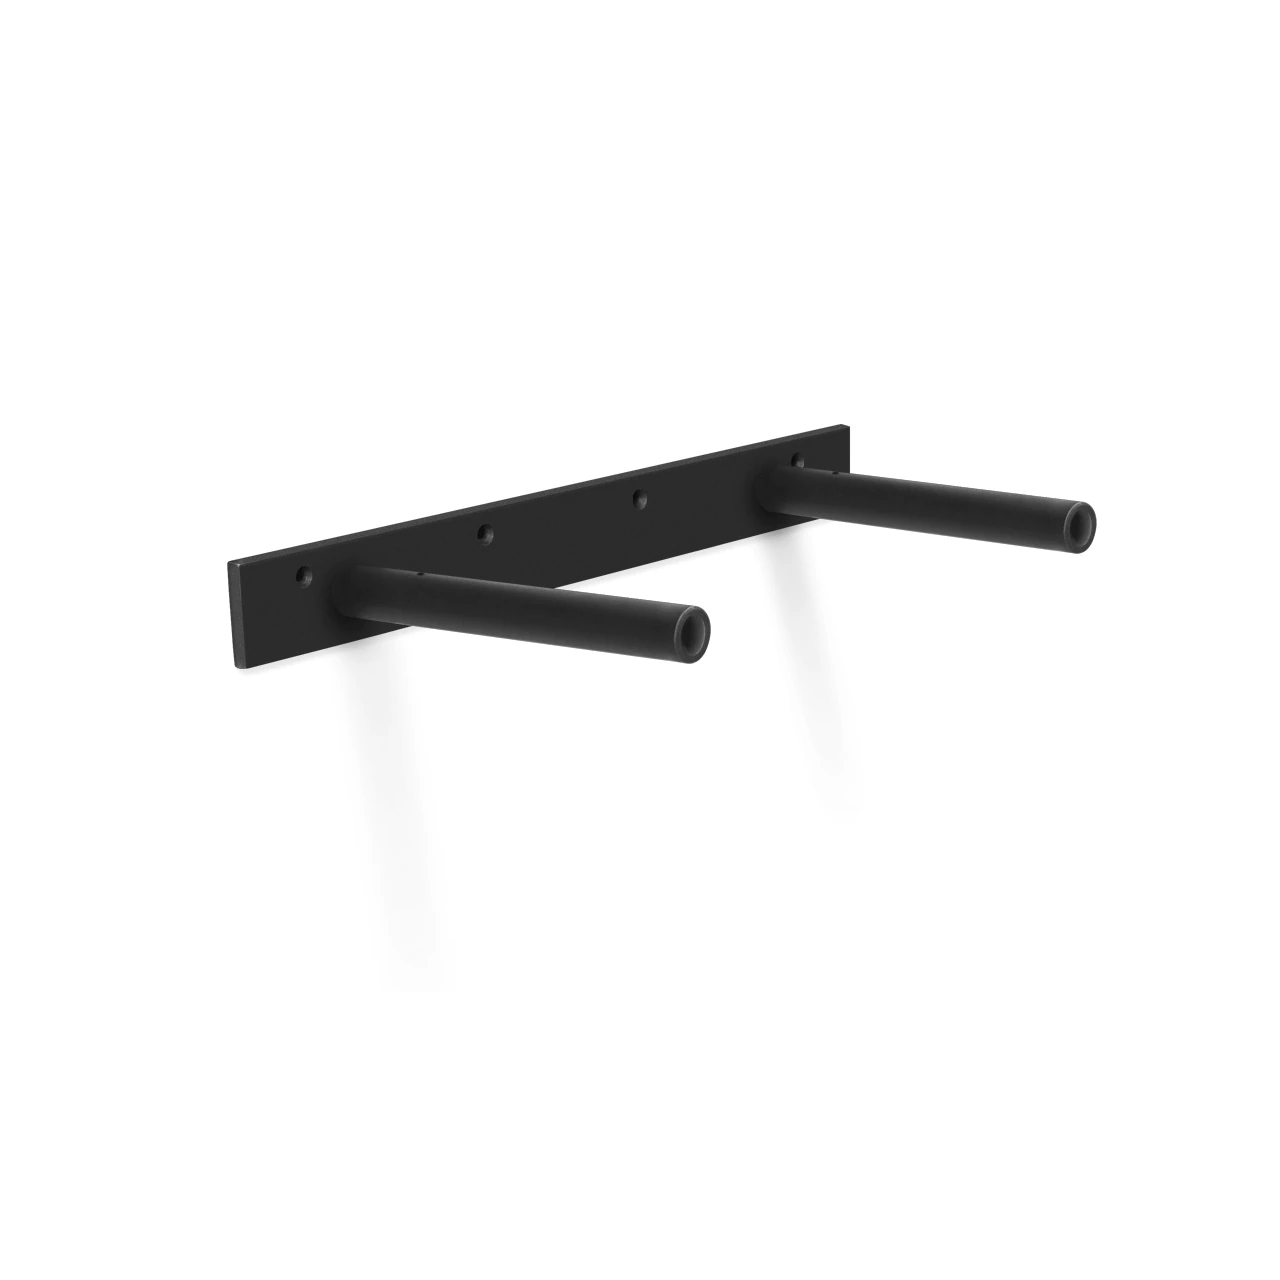 heavy duty floating shelf bracket fits inch shelves mounting options aksel kitchen cabinet sizes hutch ikea wall with pegs artisan home furniture coat rack mirror drilling holes